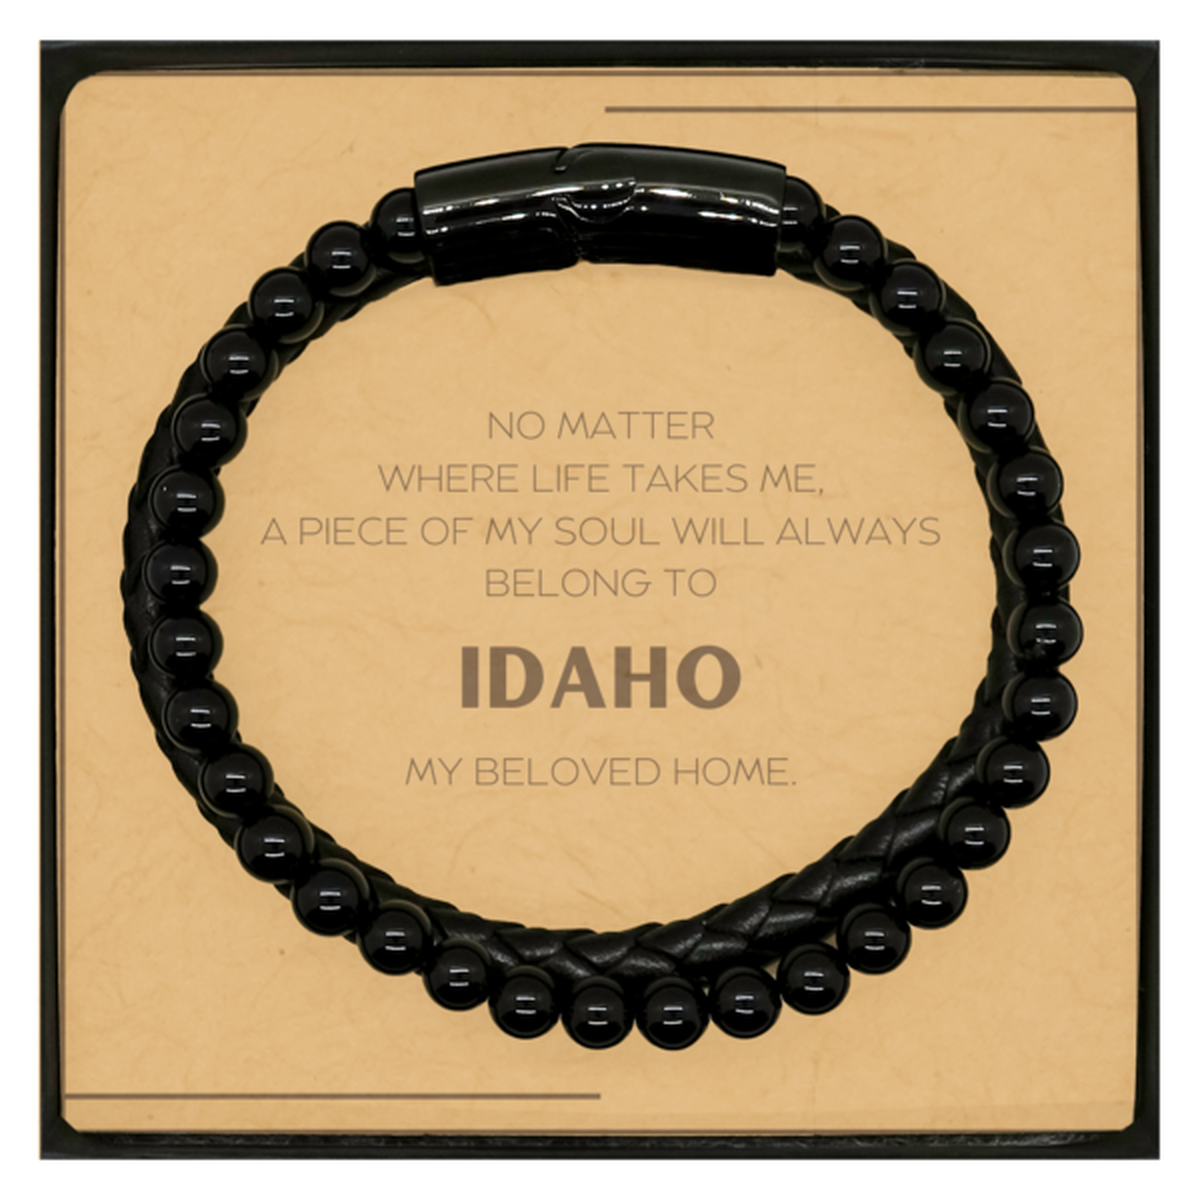 Love Idaho State Gifts, My soul will always belong to Idaho, Proud Stone Leather Bracelets, Birthday Christmas Unique Gifts For Idaho Men, Women, Friends